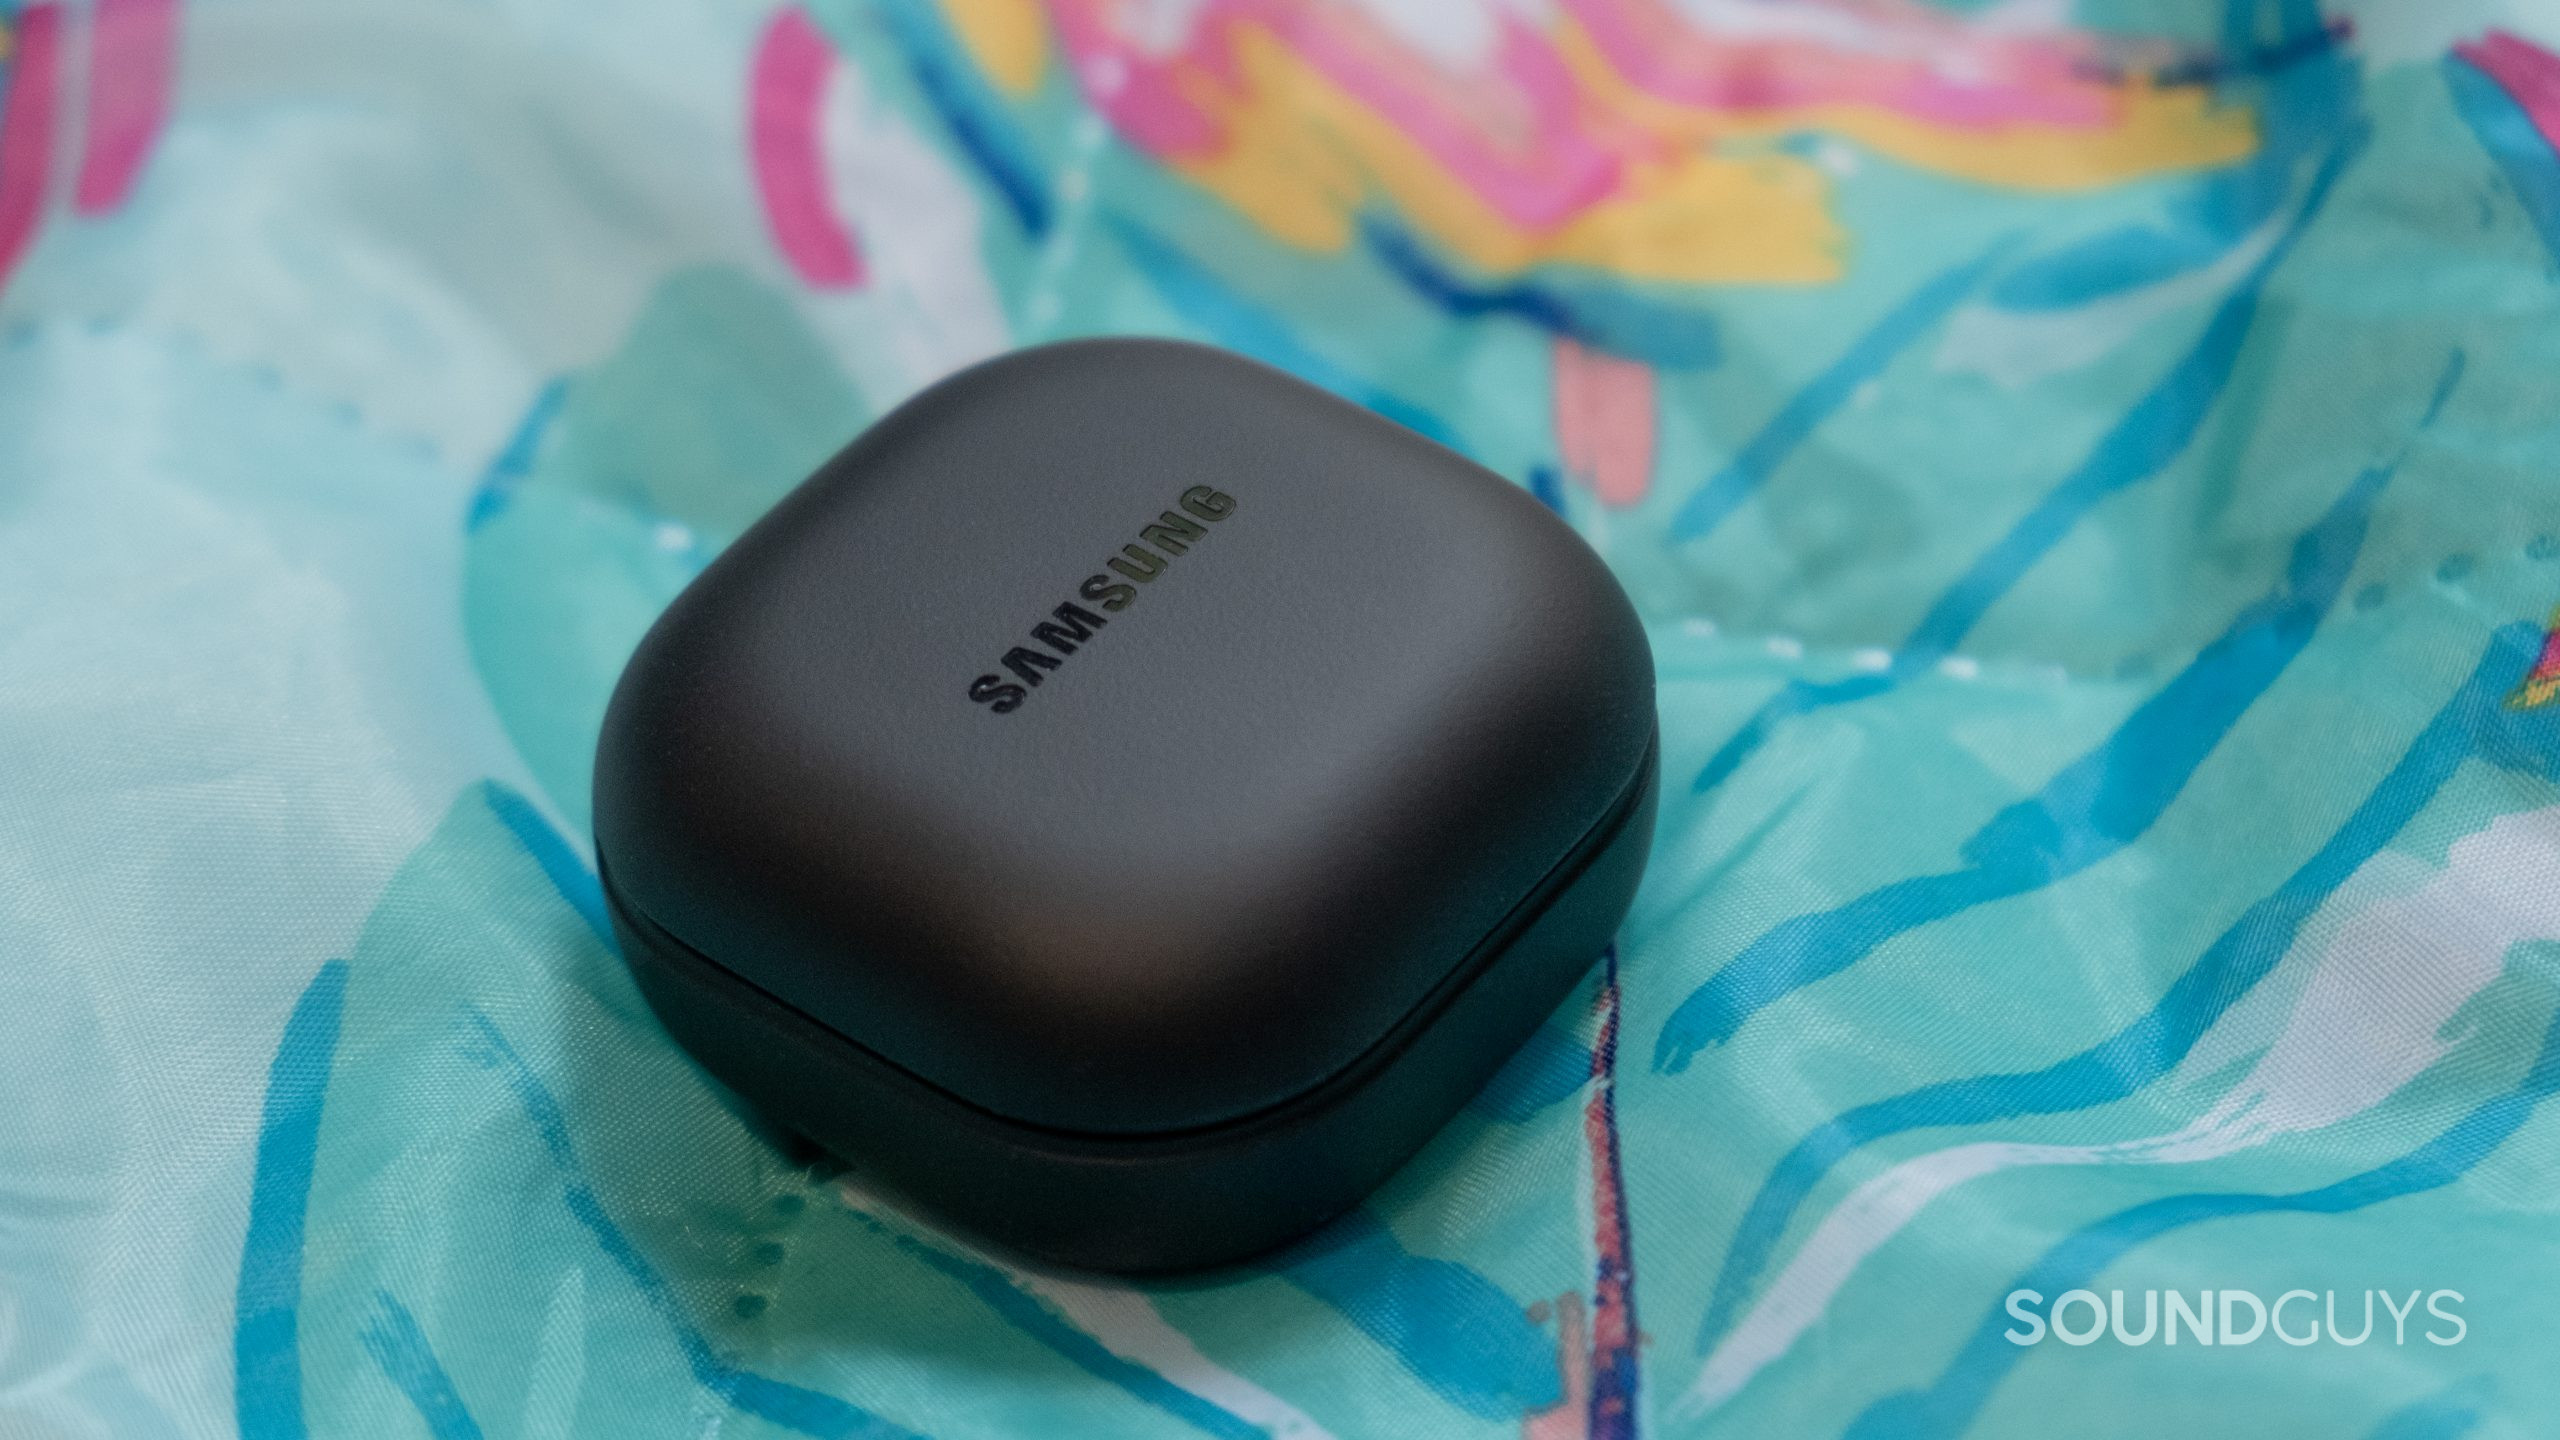 The closed back case of the Samsung Galaxy Buds 2 Pro rests on a colorful tropical themed blanket.